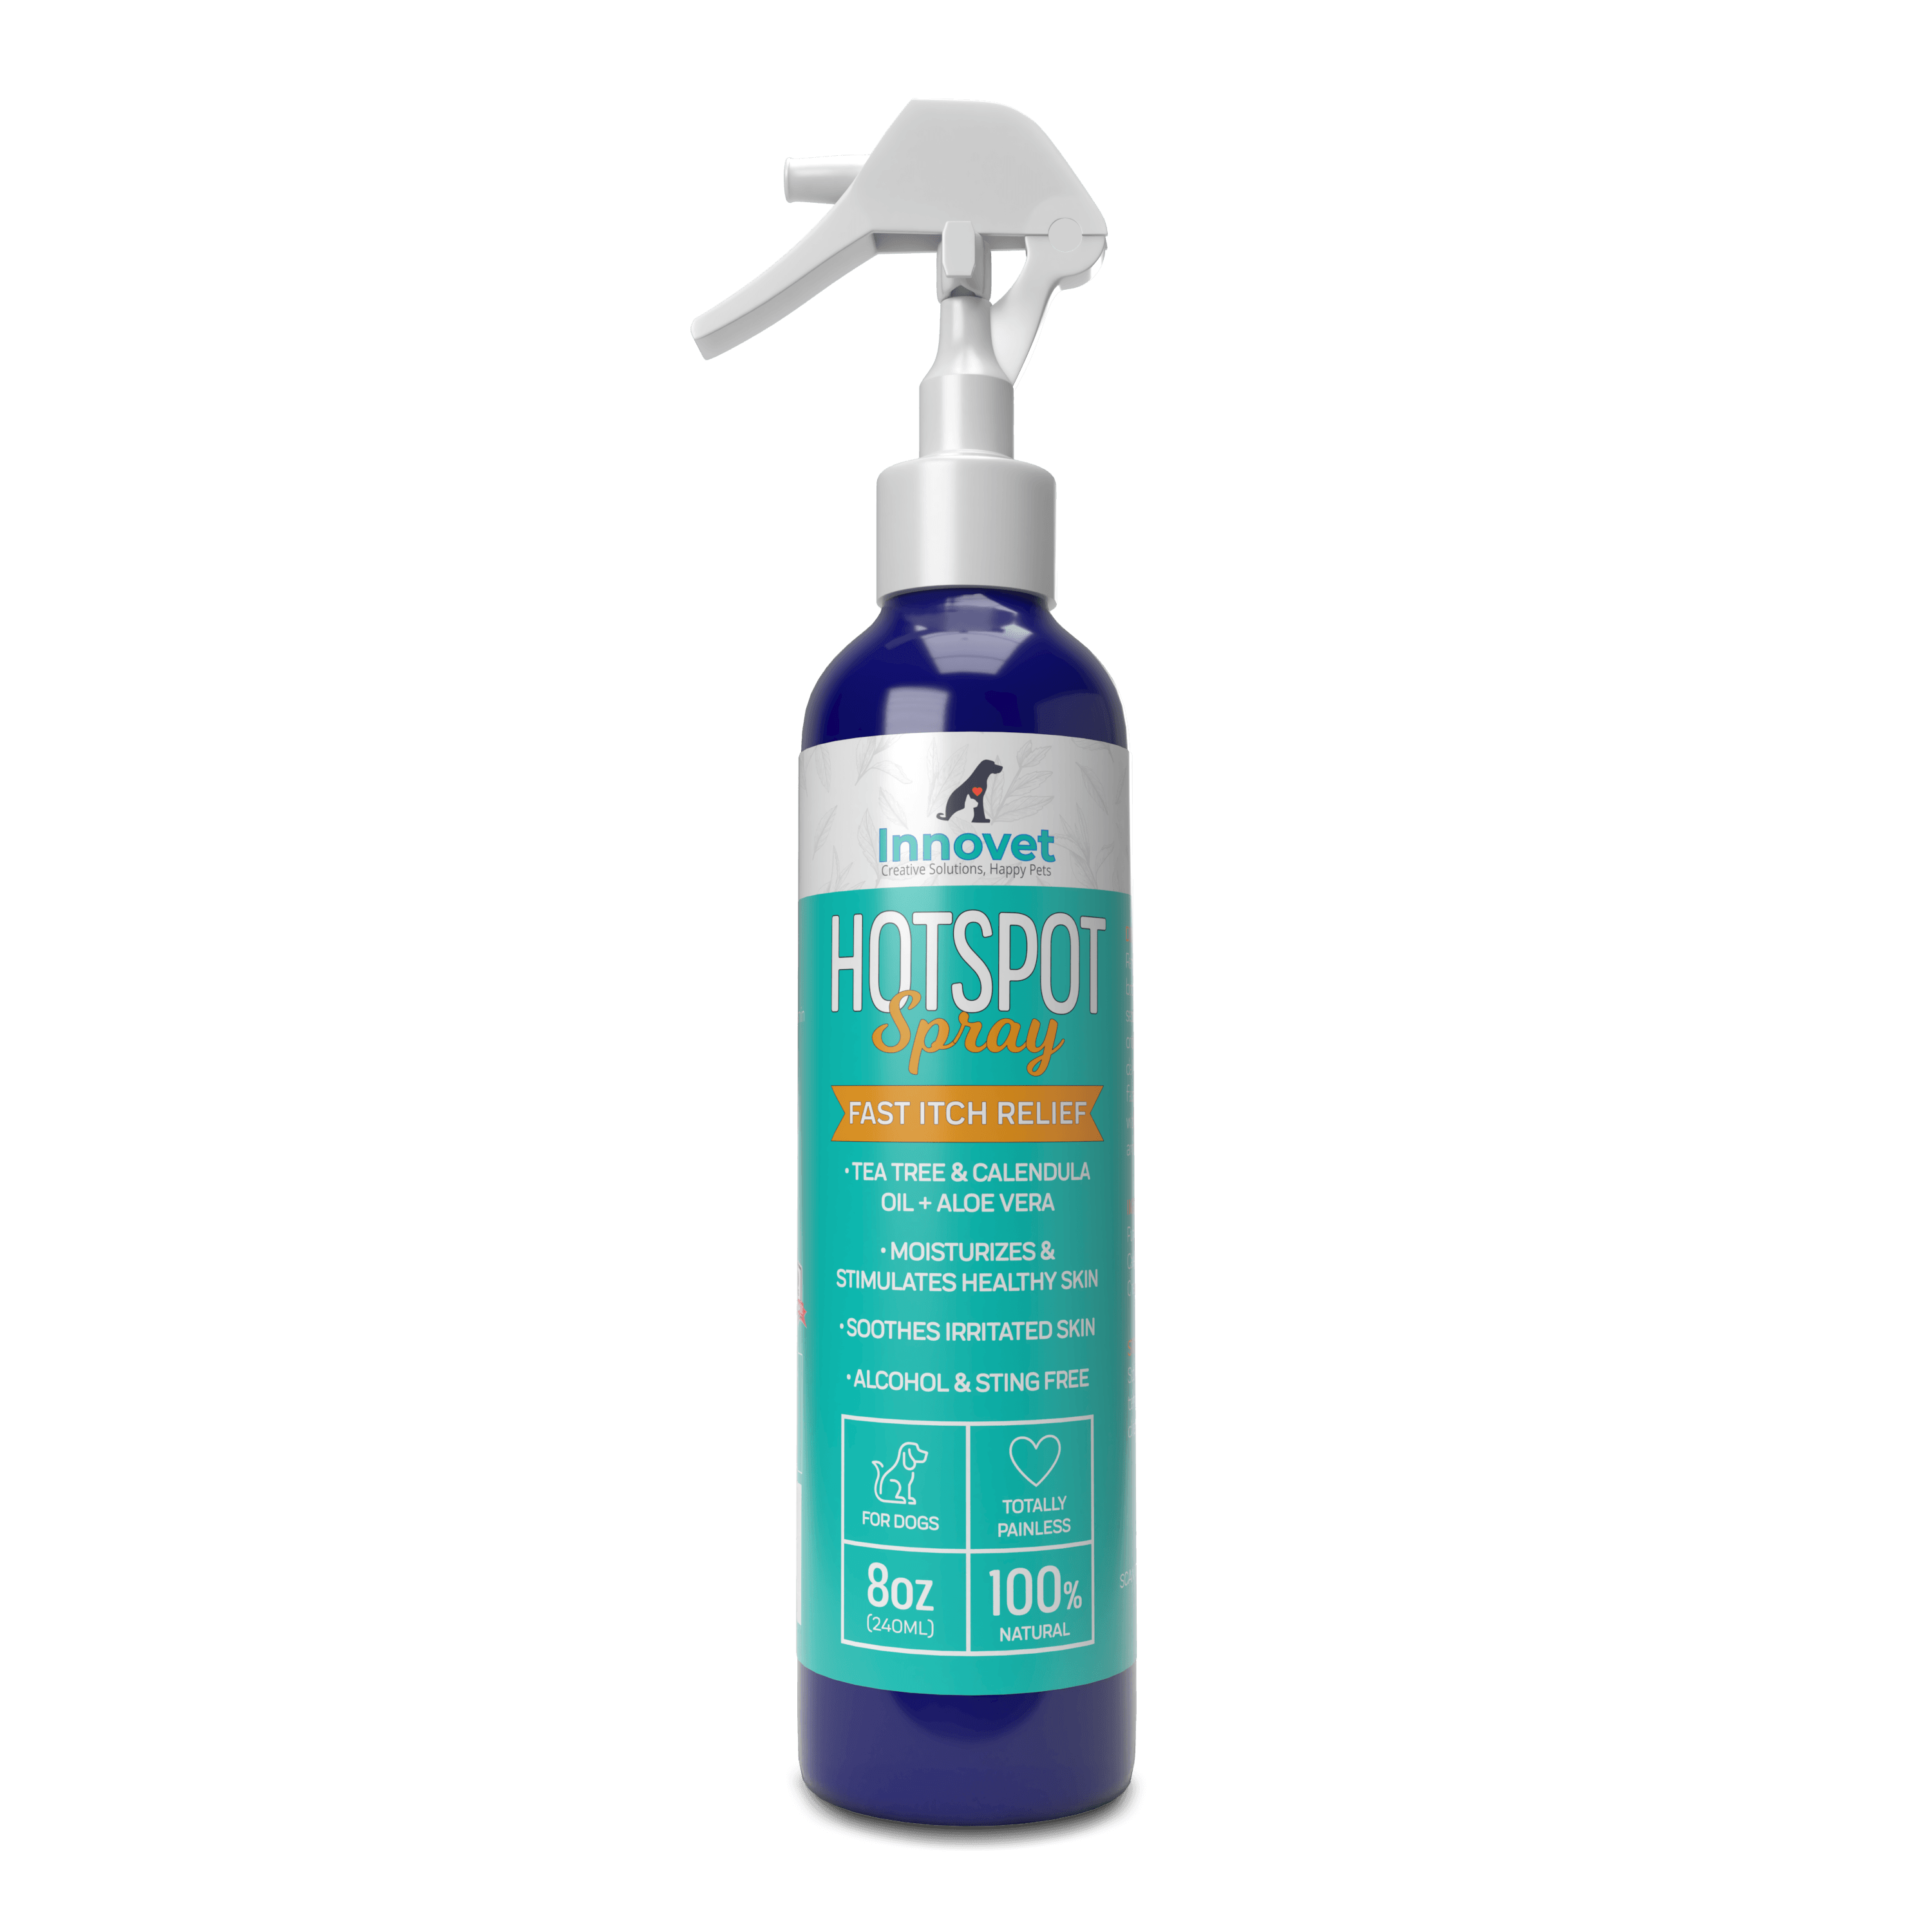 Hotspot Best Anti-Itch Spray for Dogs – Innovet Pet